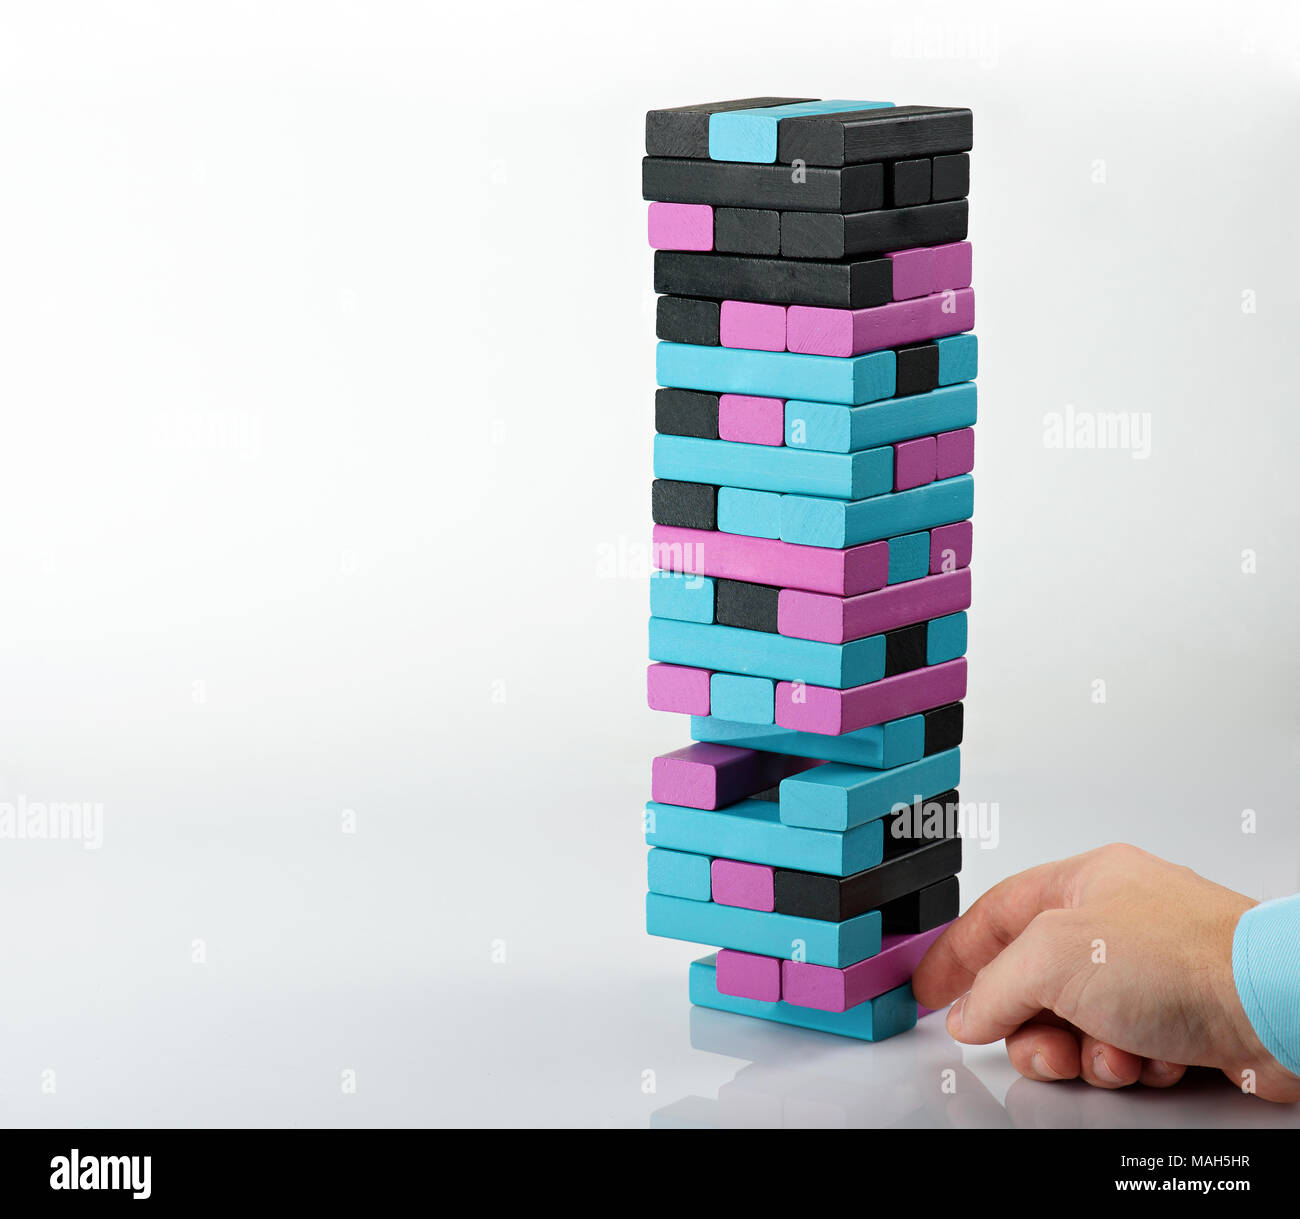 Take one brick from wooden tower. Balancing tower concept Stock Photo